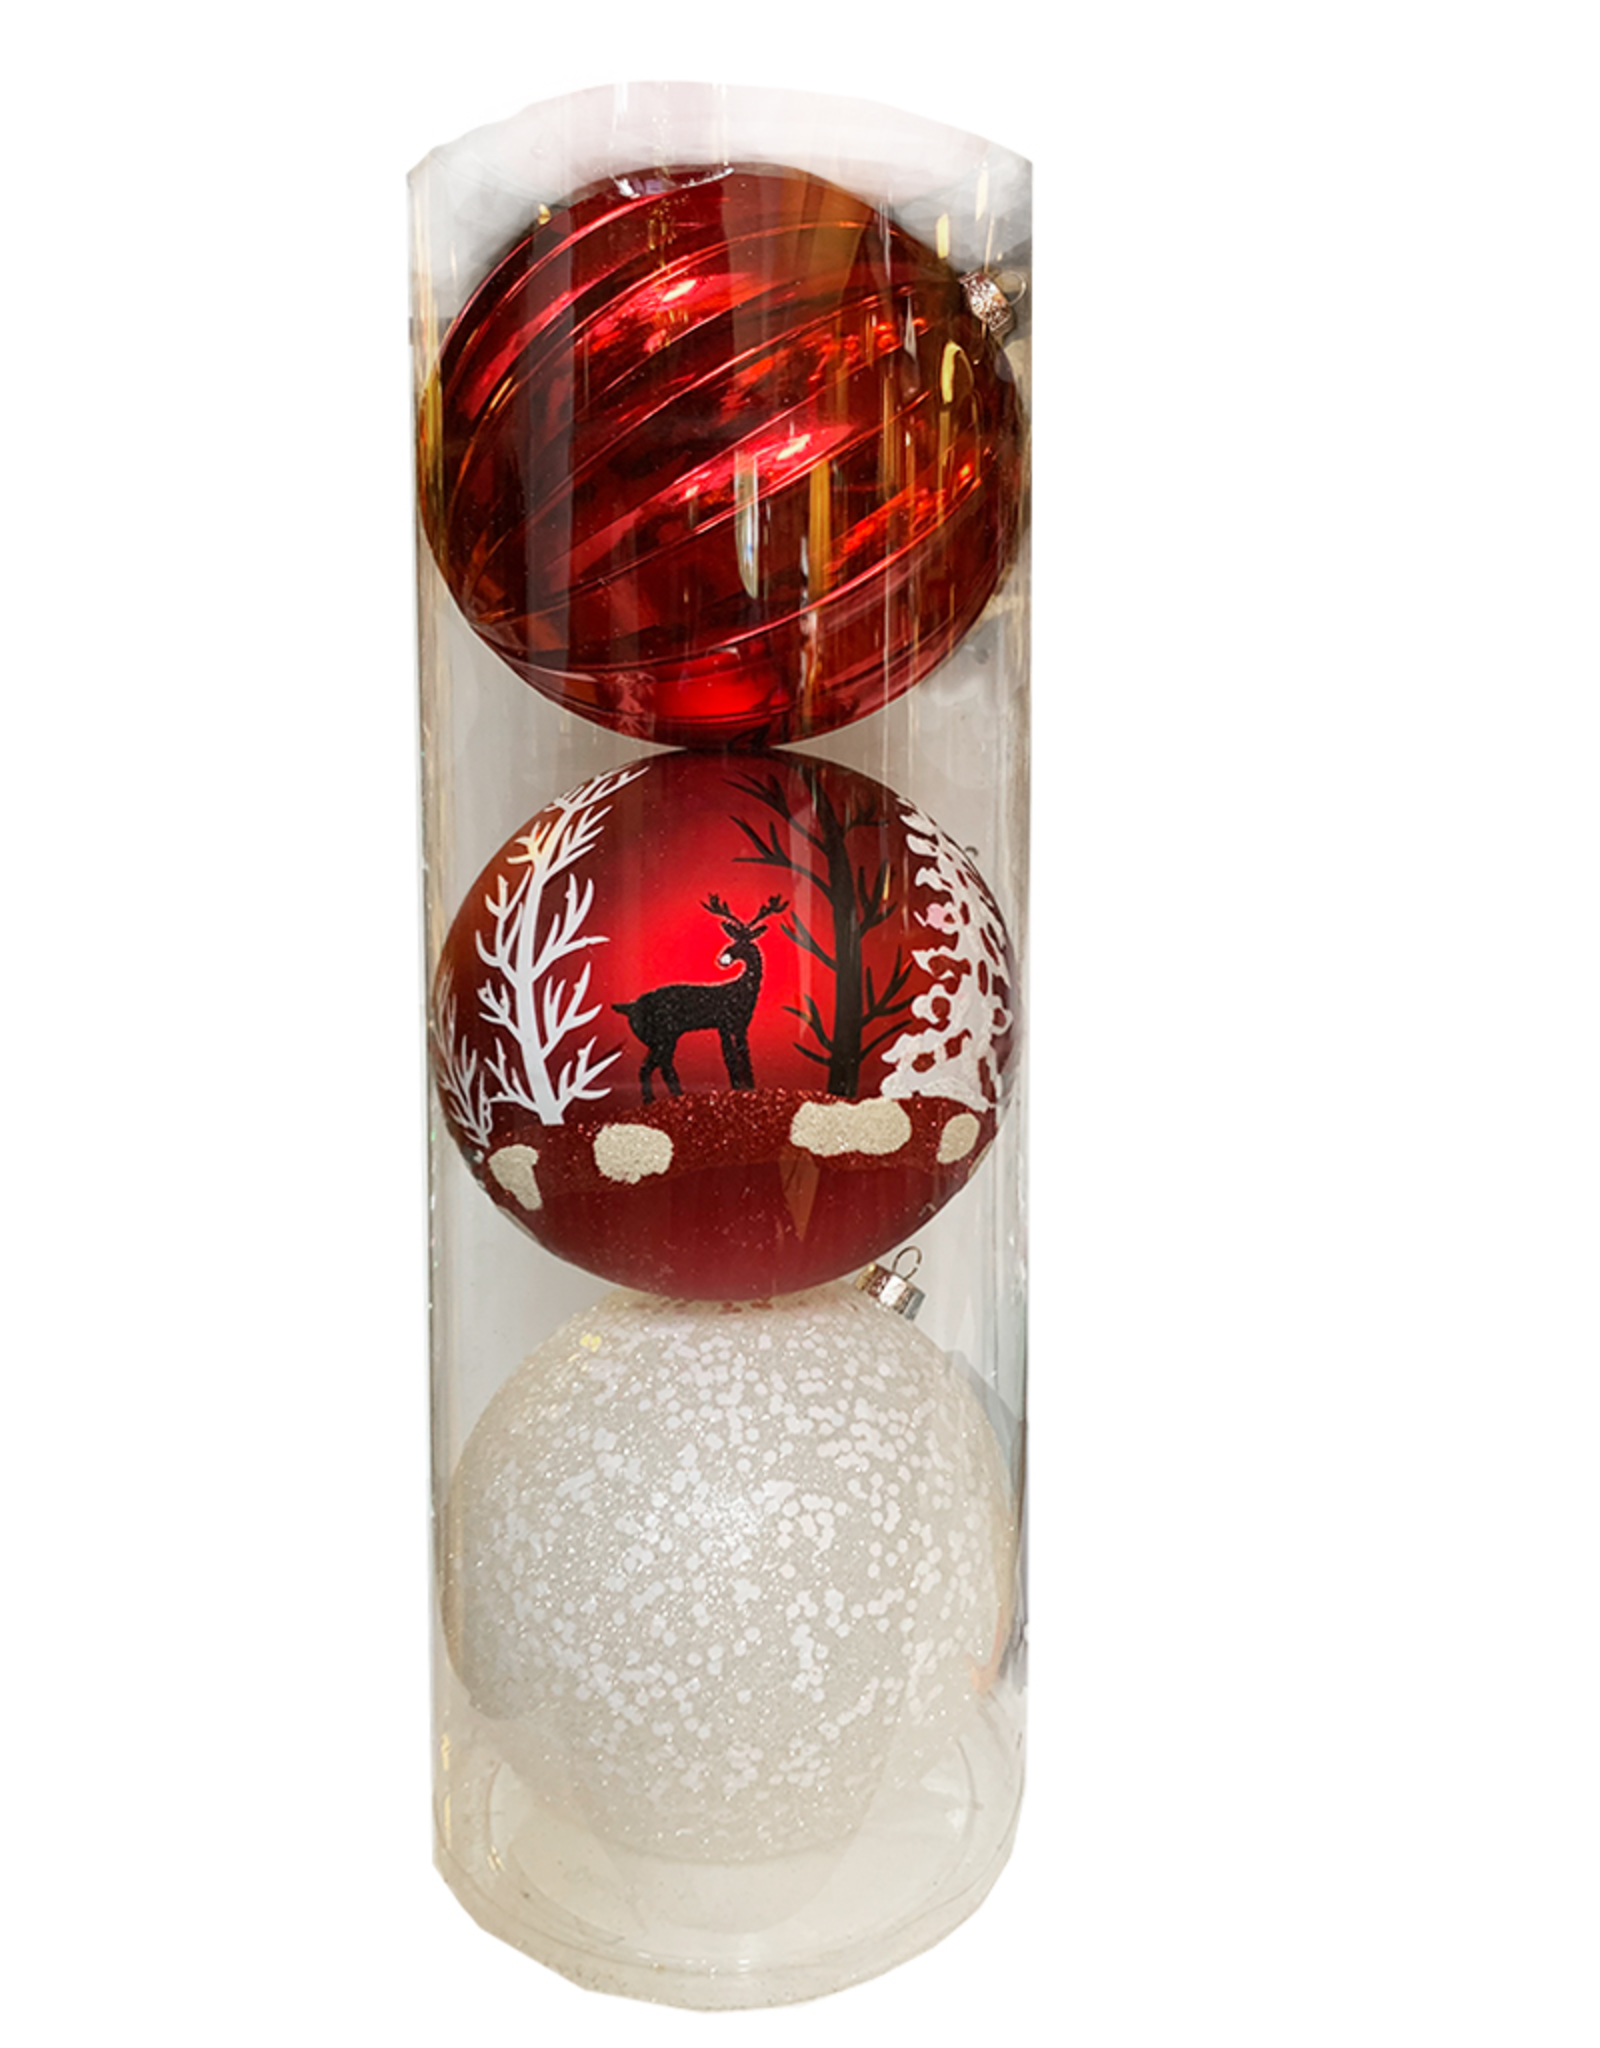 Darice Large Ball Ornaments Red White 3pk 150mm Shatter-Proof -E